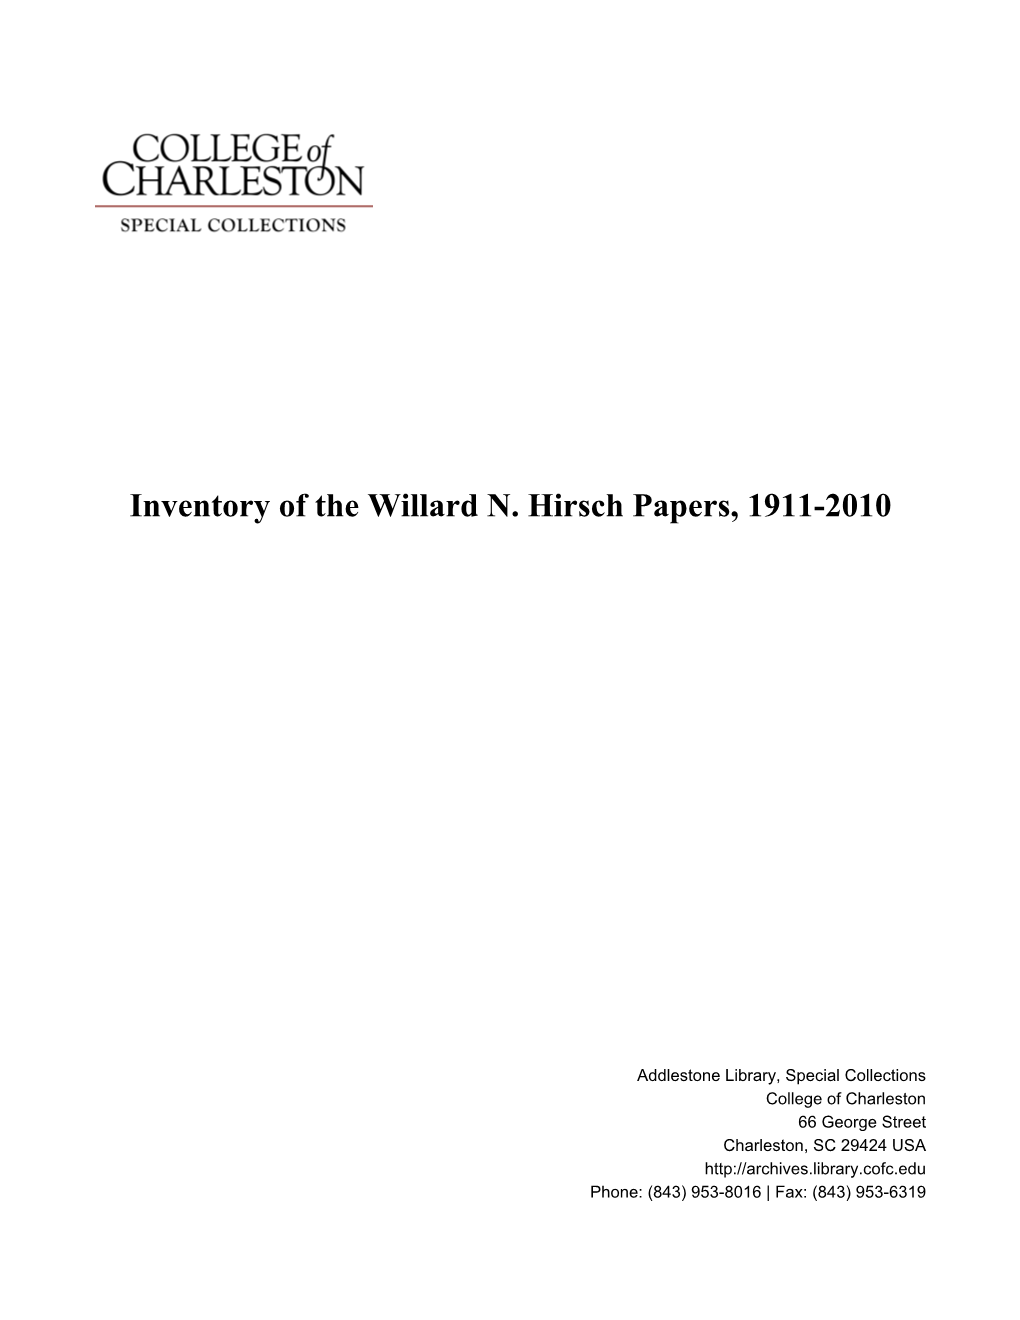 Inventory of the Willard N. Hirsch Papers, 1911-2010